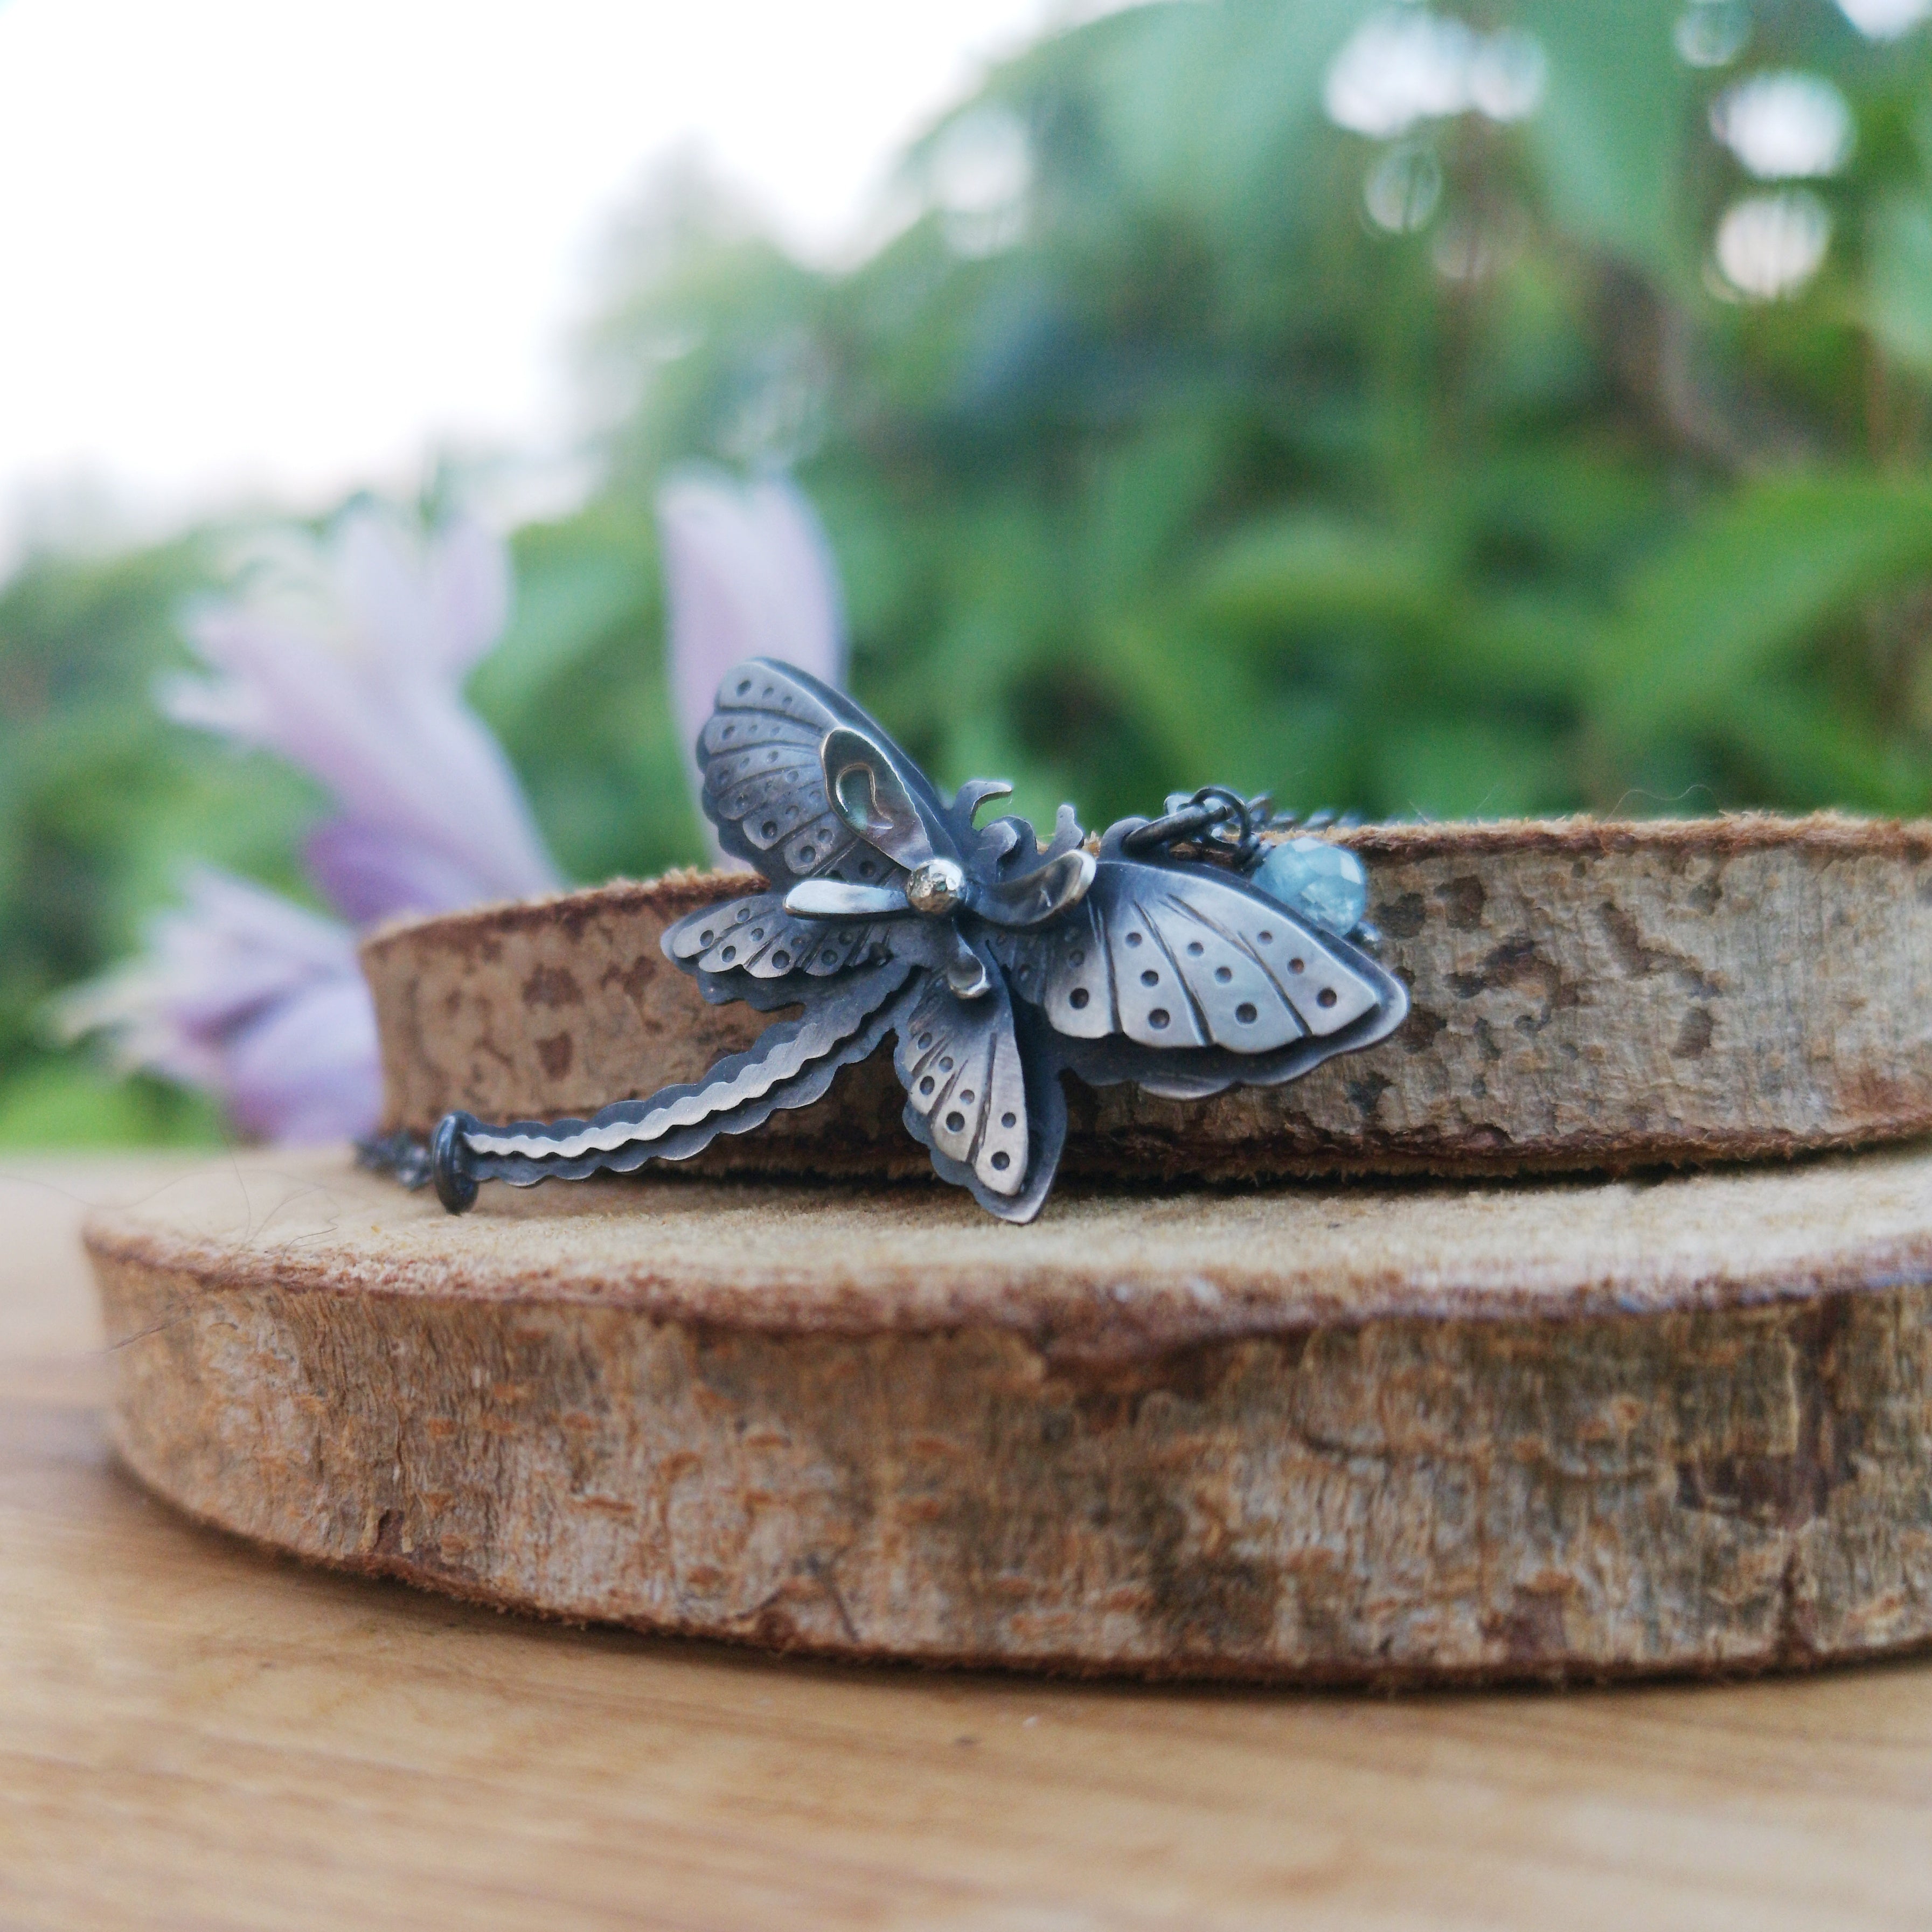 The Dragonfly Necklace